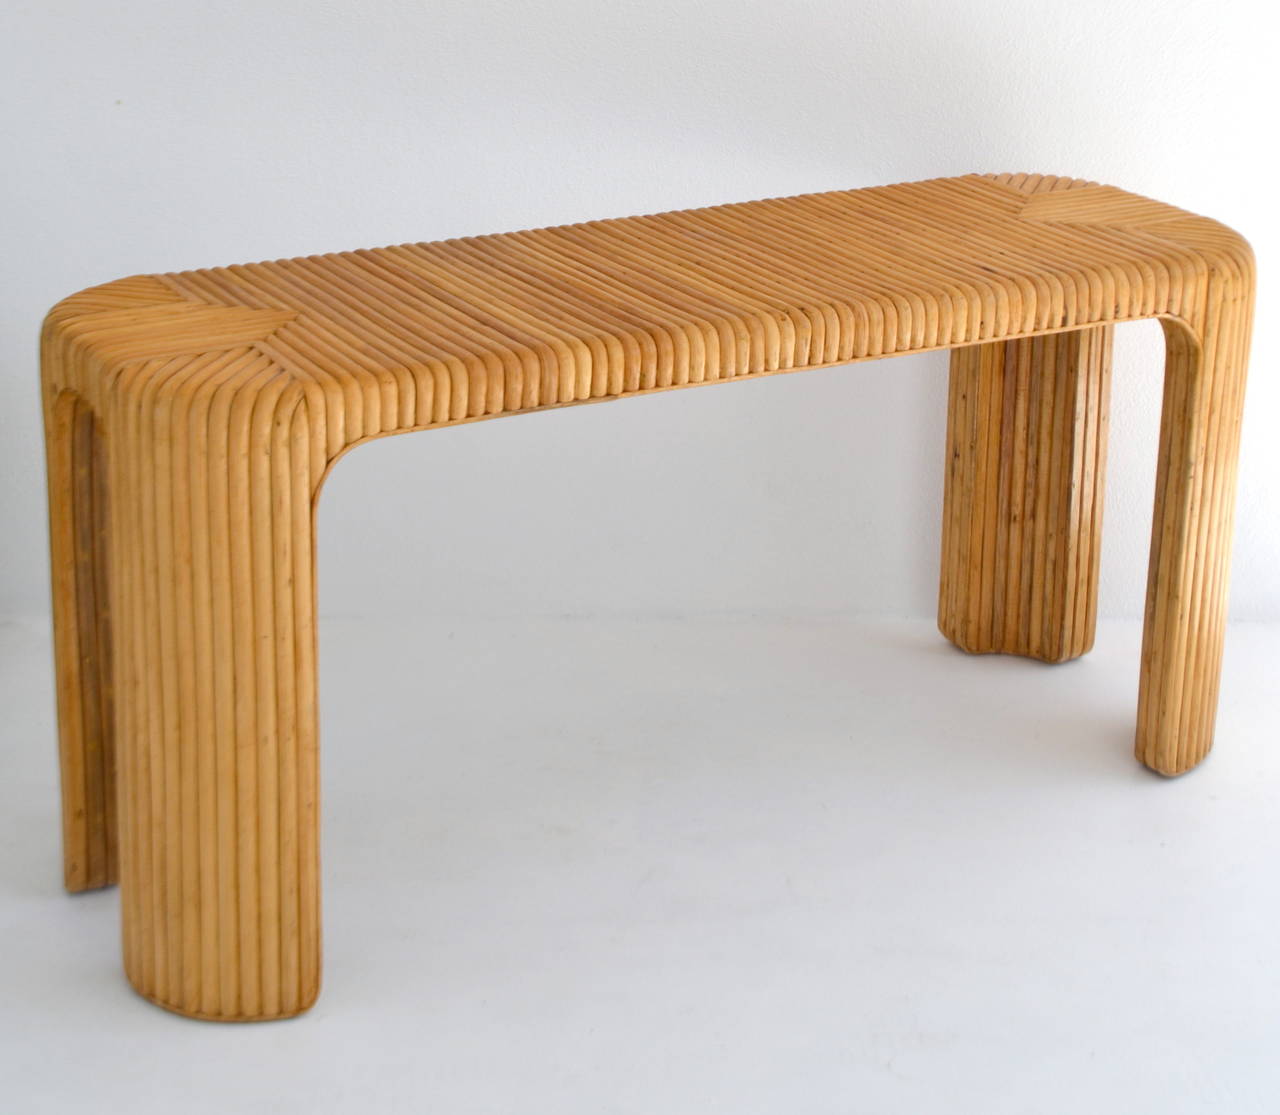 Incredible Mid Century Modern split rattan console / sofa table in the style of Paul Frankl, c. 1970s.